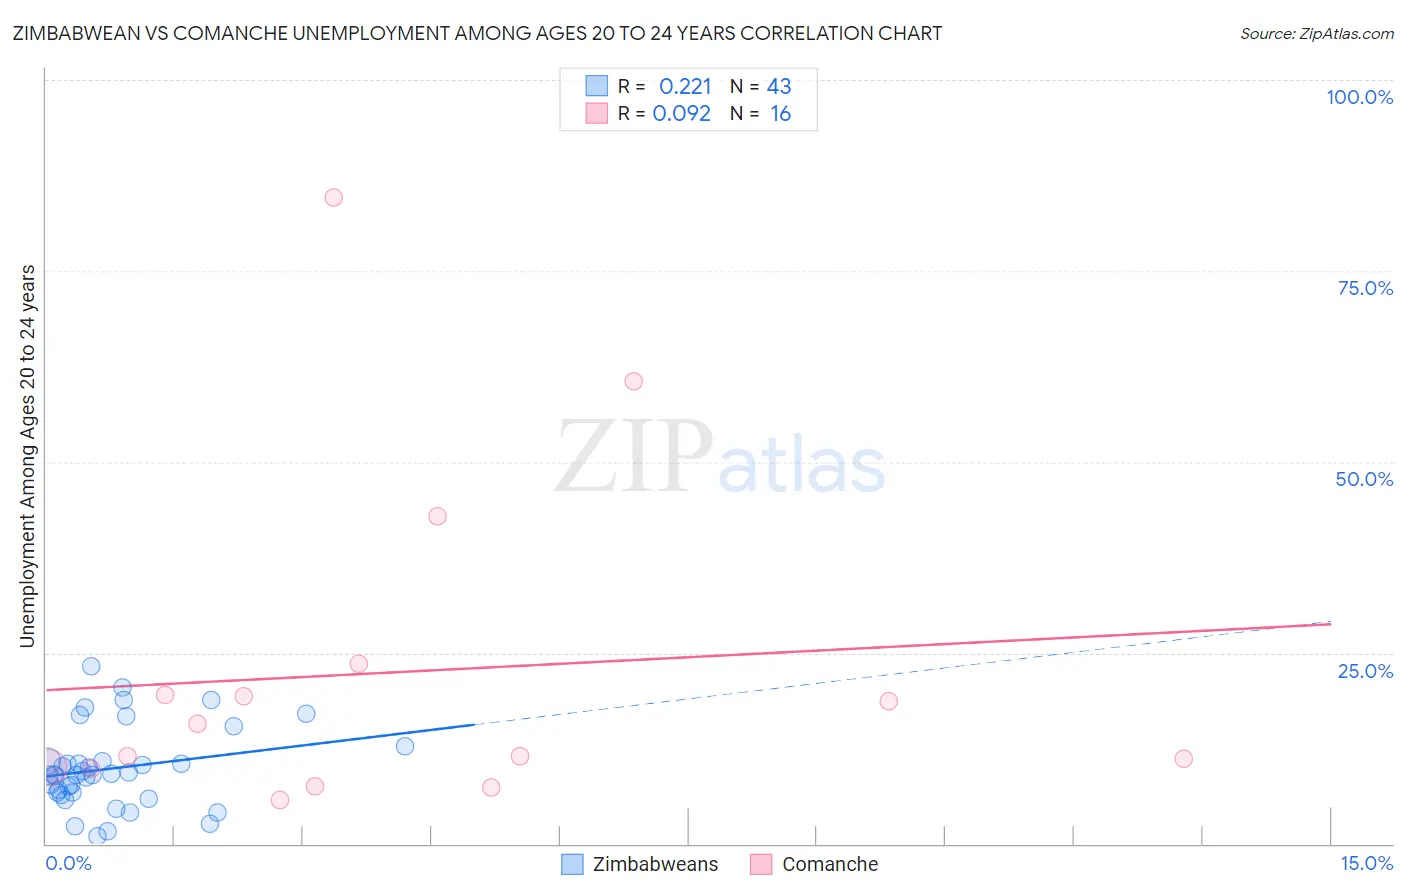 Zimbabwean vs Comanche Unemployment Among Ages 20 to 24 years